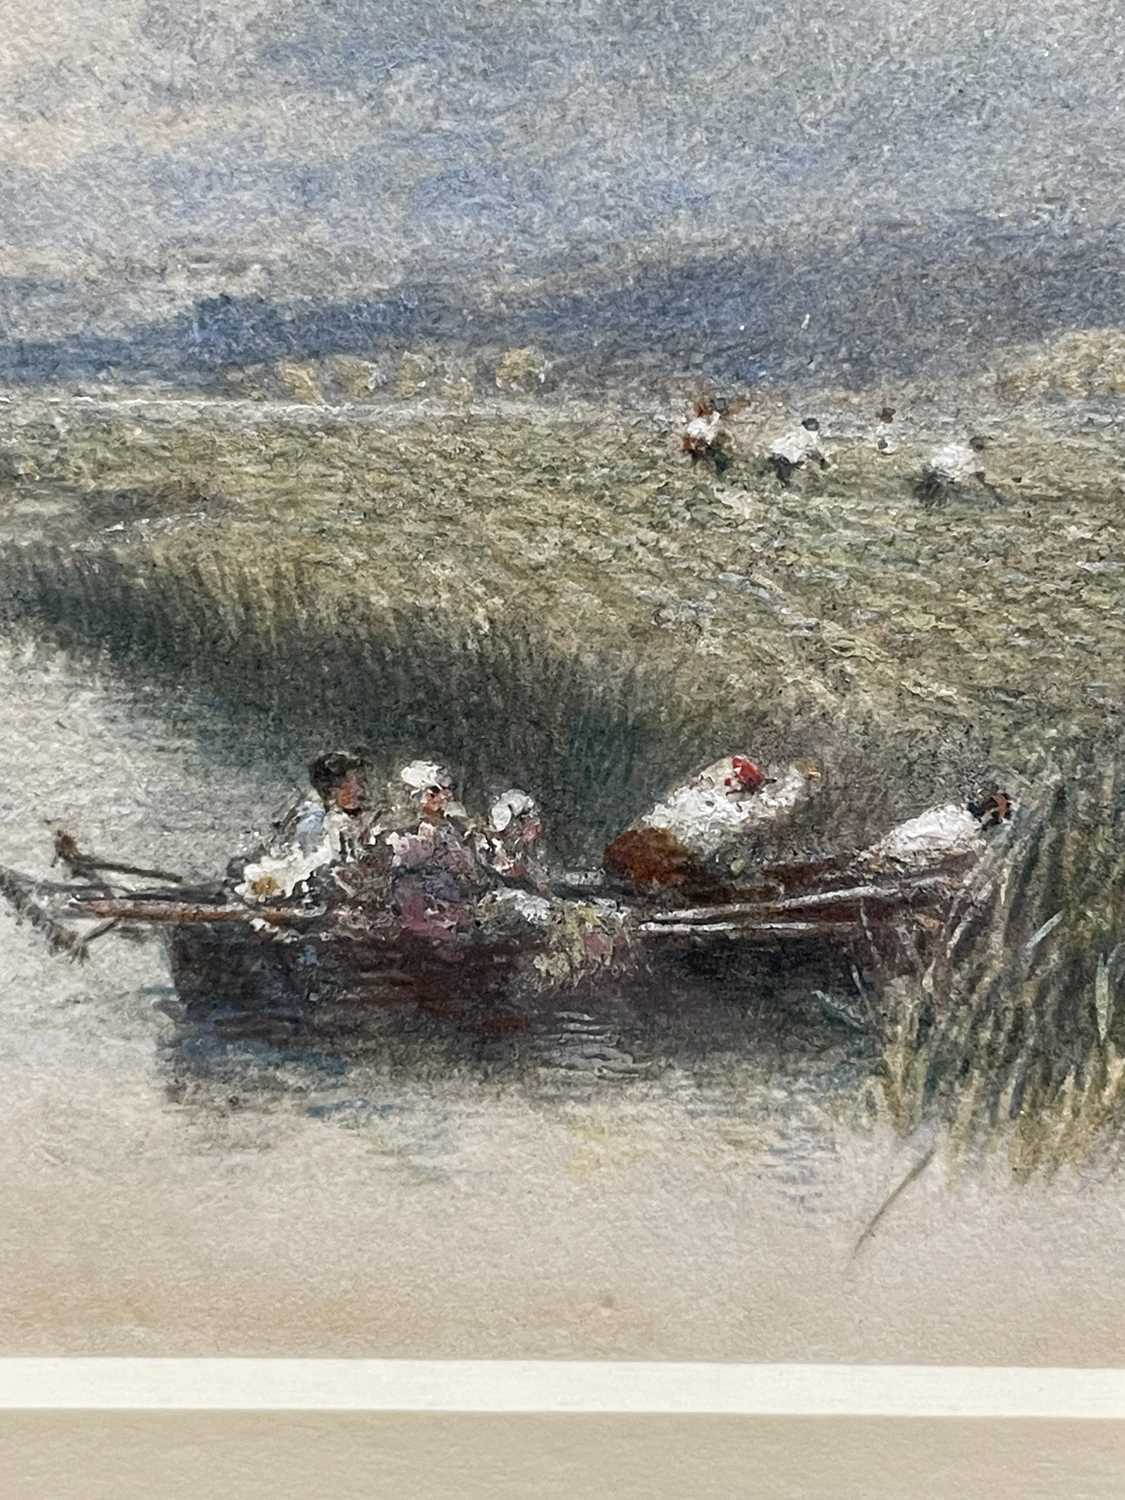 Myles Birket Foster RWS (1825-1899) "The Lay of the Labourer" Watercolour, 9.5cm by 13cm - Image 10 of 12